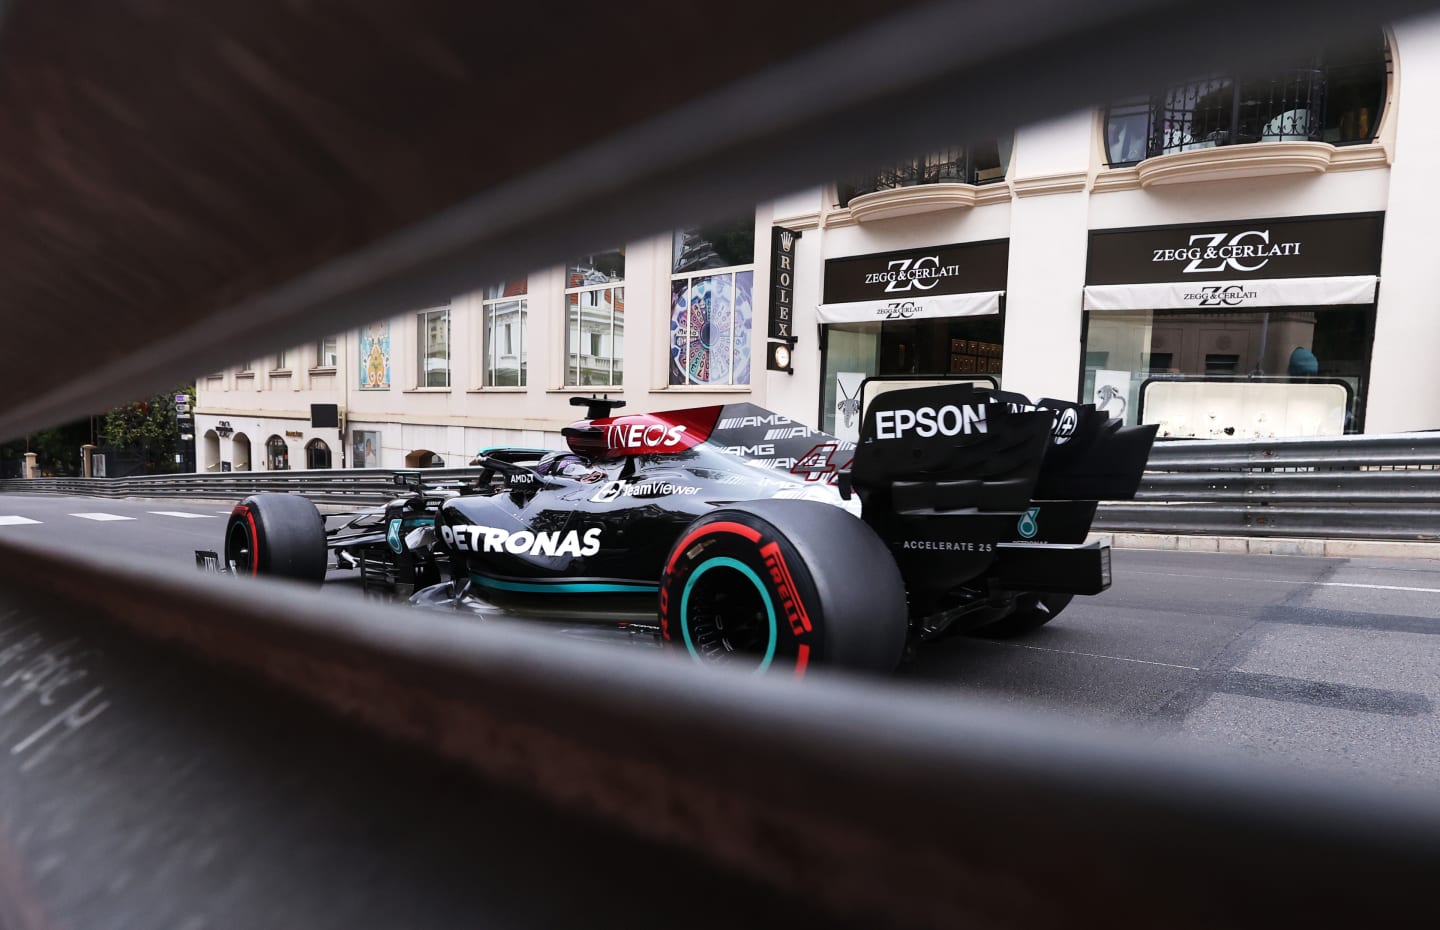 MONTE-CARLO, MONACO - MAY 22: Lewis Hamilton of Great Britain driving the (44) Mercedes AMG Petronas F1 Team Mercedes W12 on track during qualifying for the F1 Grand Prix of Monaco at Circuit de Monaco on May 22, 2021 in Monte-Carlo, Monaco. (Photo by Lars Baron/Getty Images)